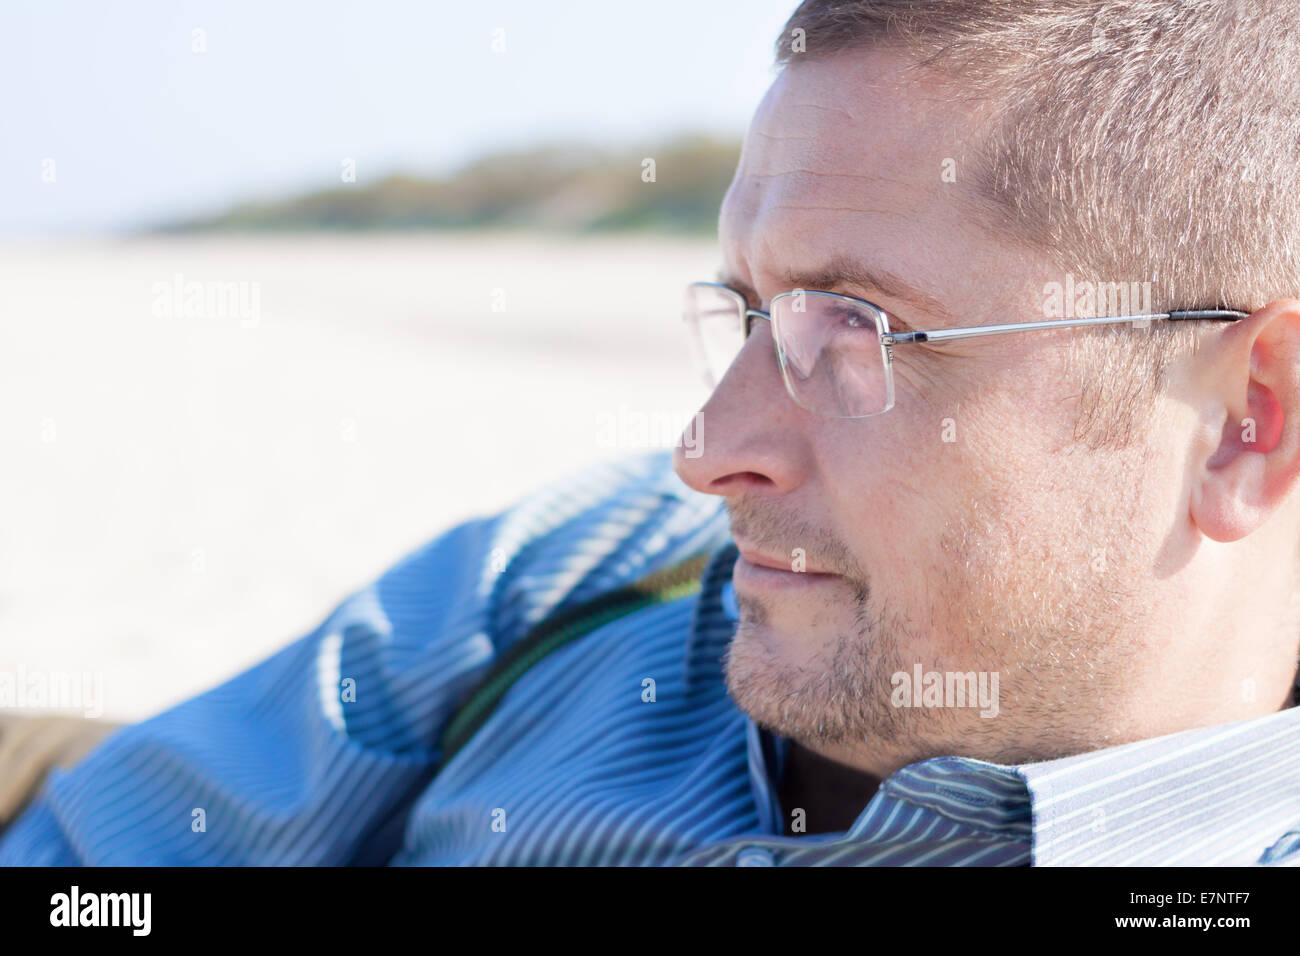 man 40 years portrait close up outdoor Stock Photo